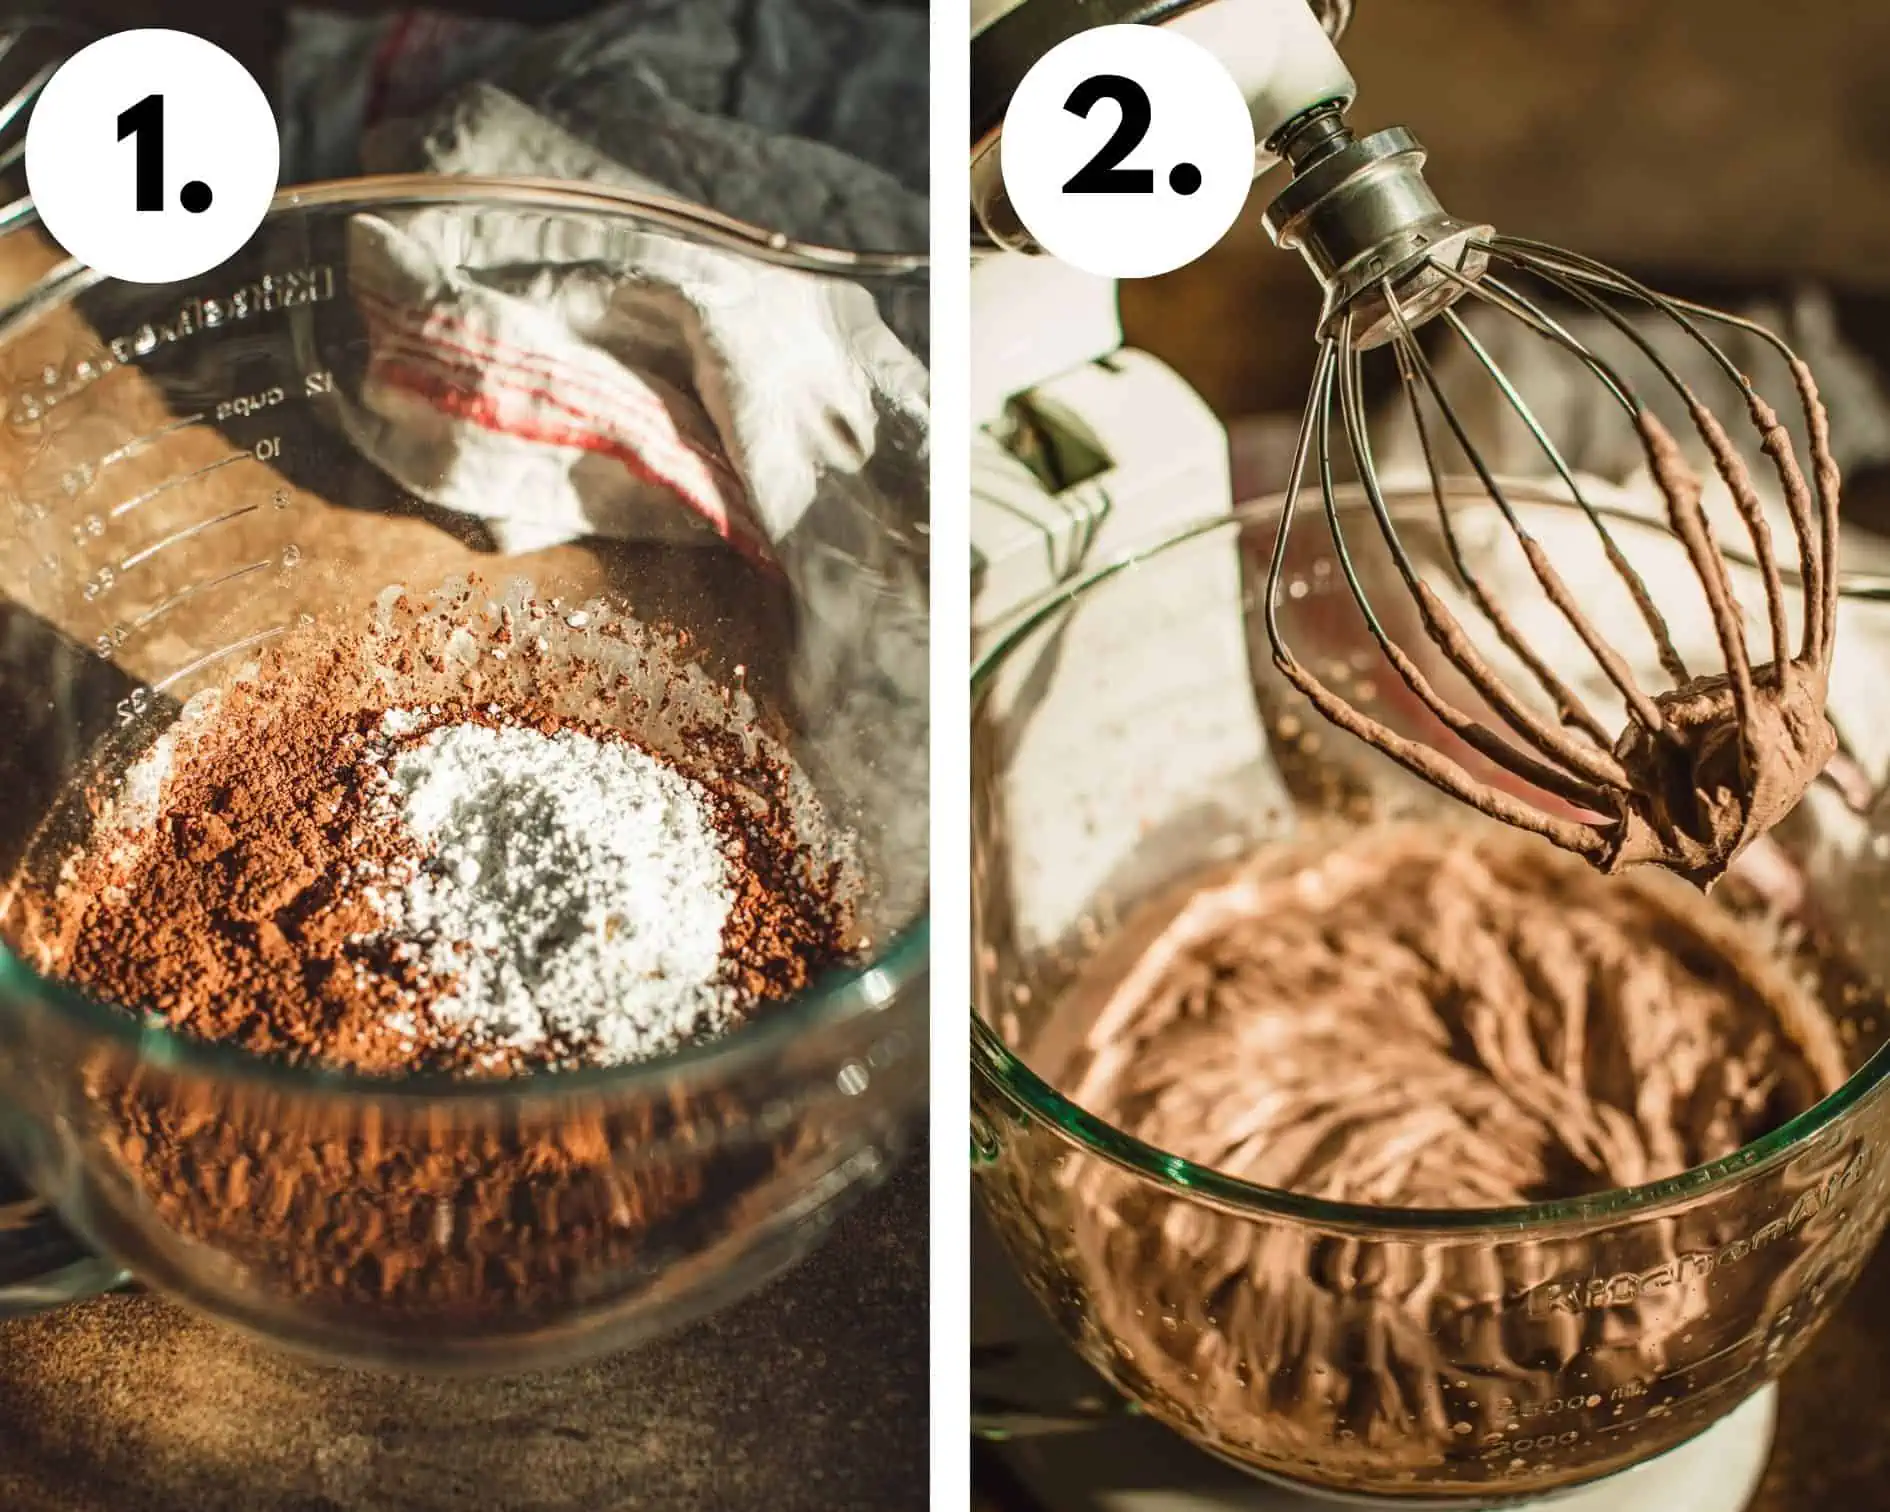 How to make chocolate whipped cream steps 1 and 2.